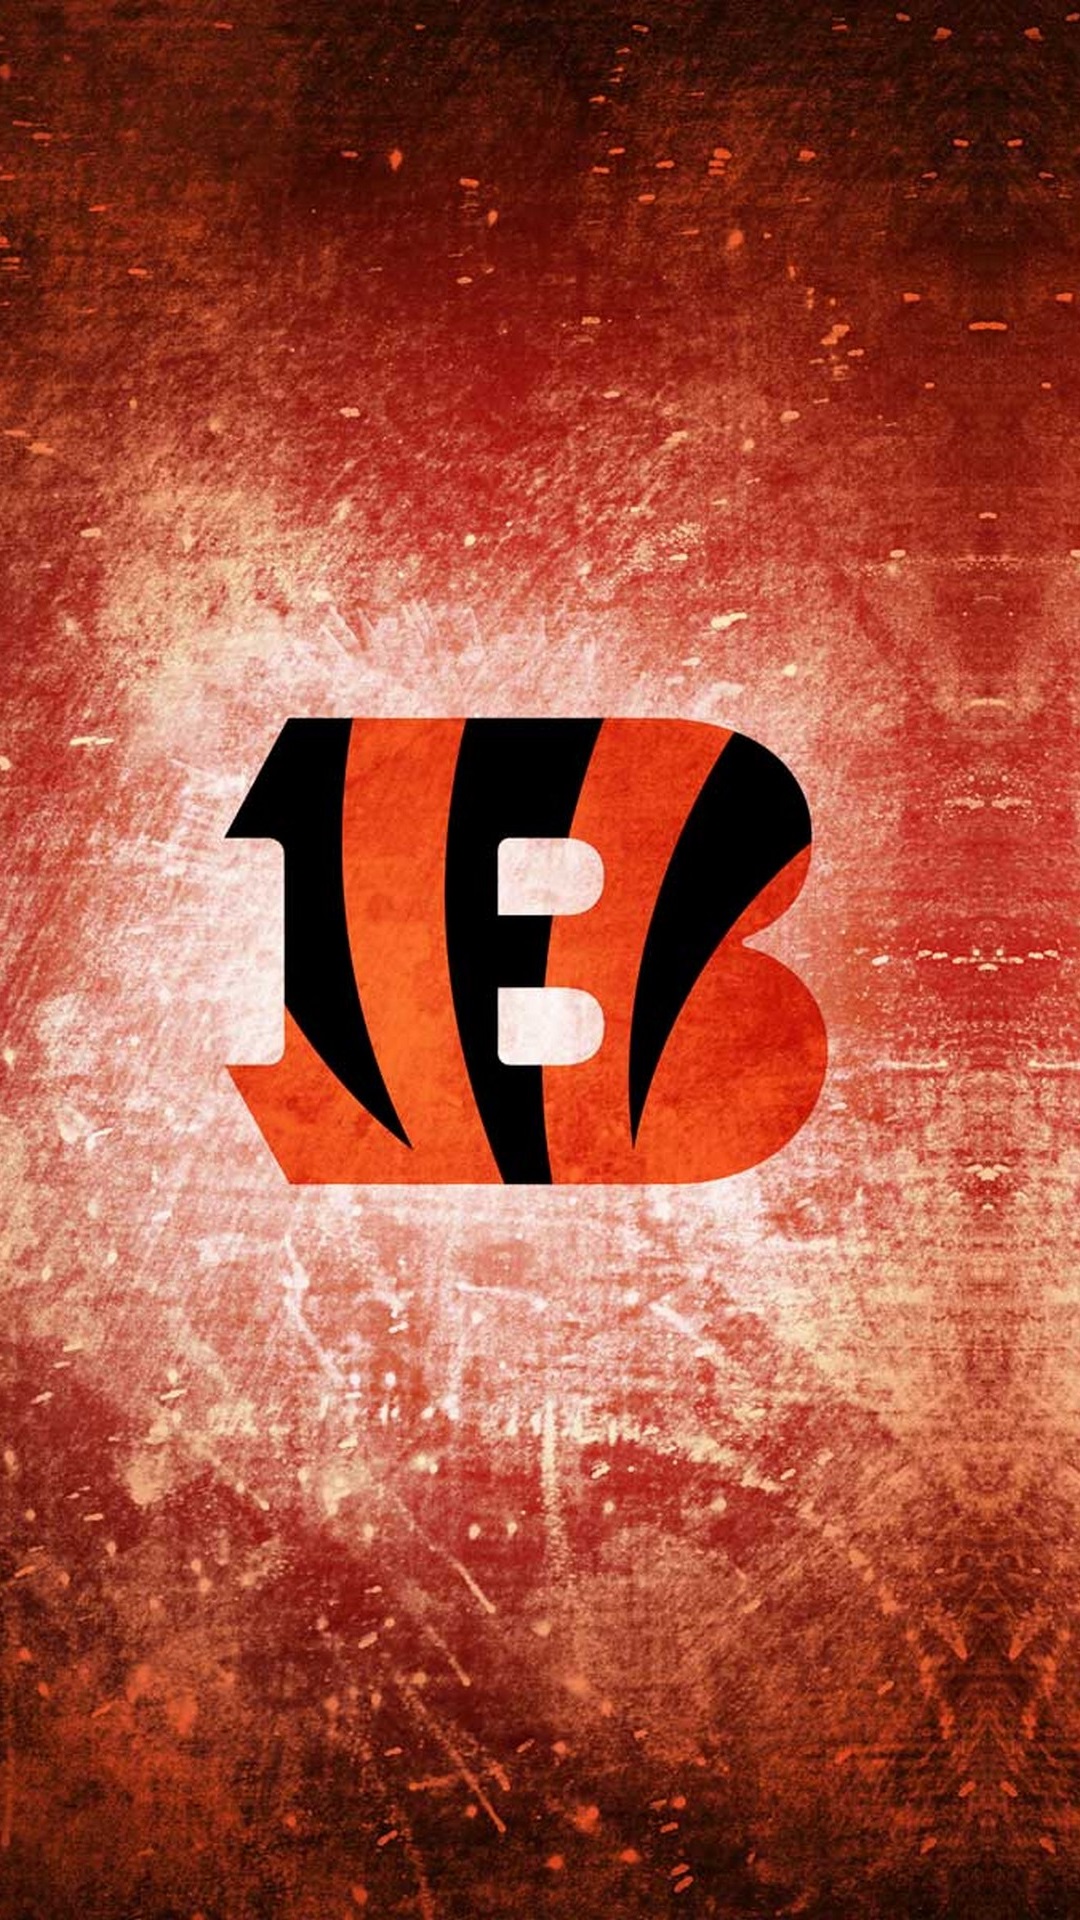 Cincinnati Bengals iPhone Wallpaper High Quality with high-resolution 1080x1920 pixel. Donwload and set as wallpaper for your iPhone X, iPhone XS home screen backgrounds, XS Max, XR, iPhone8 lock screen wallpaper, iPhone 7, 6, SE and other mobile devices